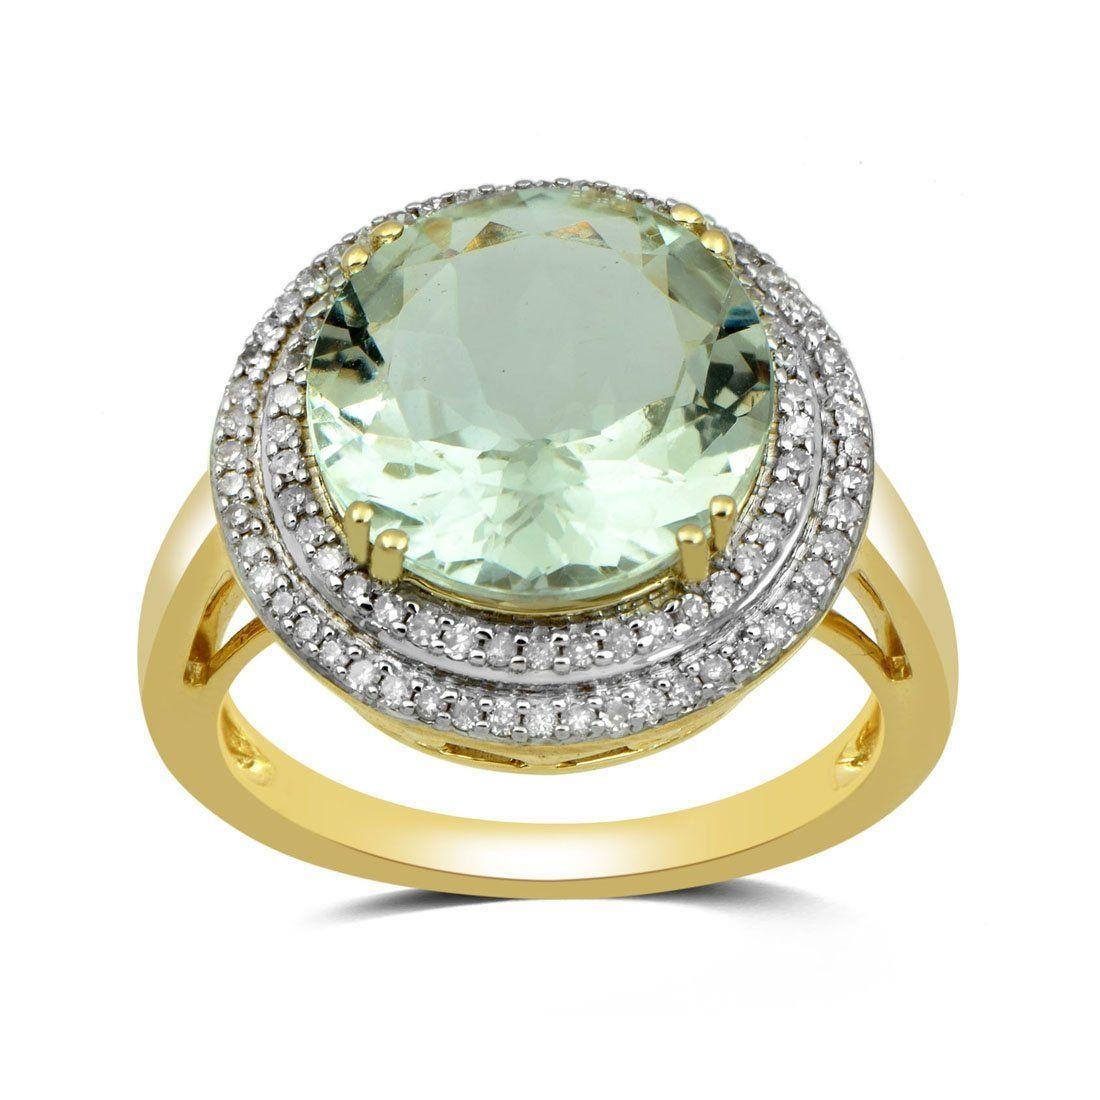 Bevilles 9ct Yellow Gold Green Amethyst Ring with 0.33ct of Diamonds